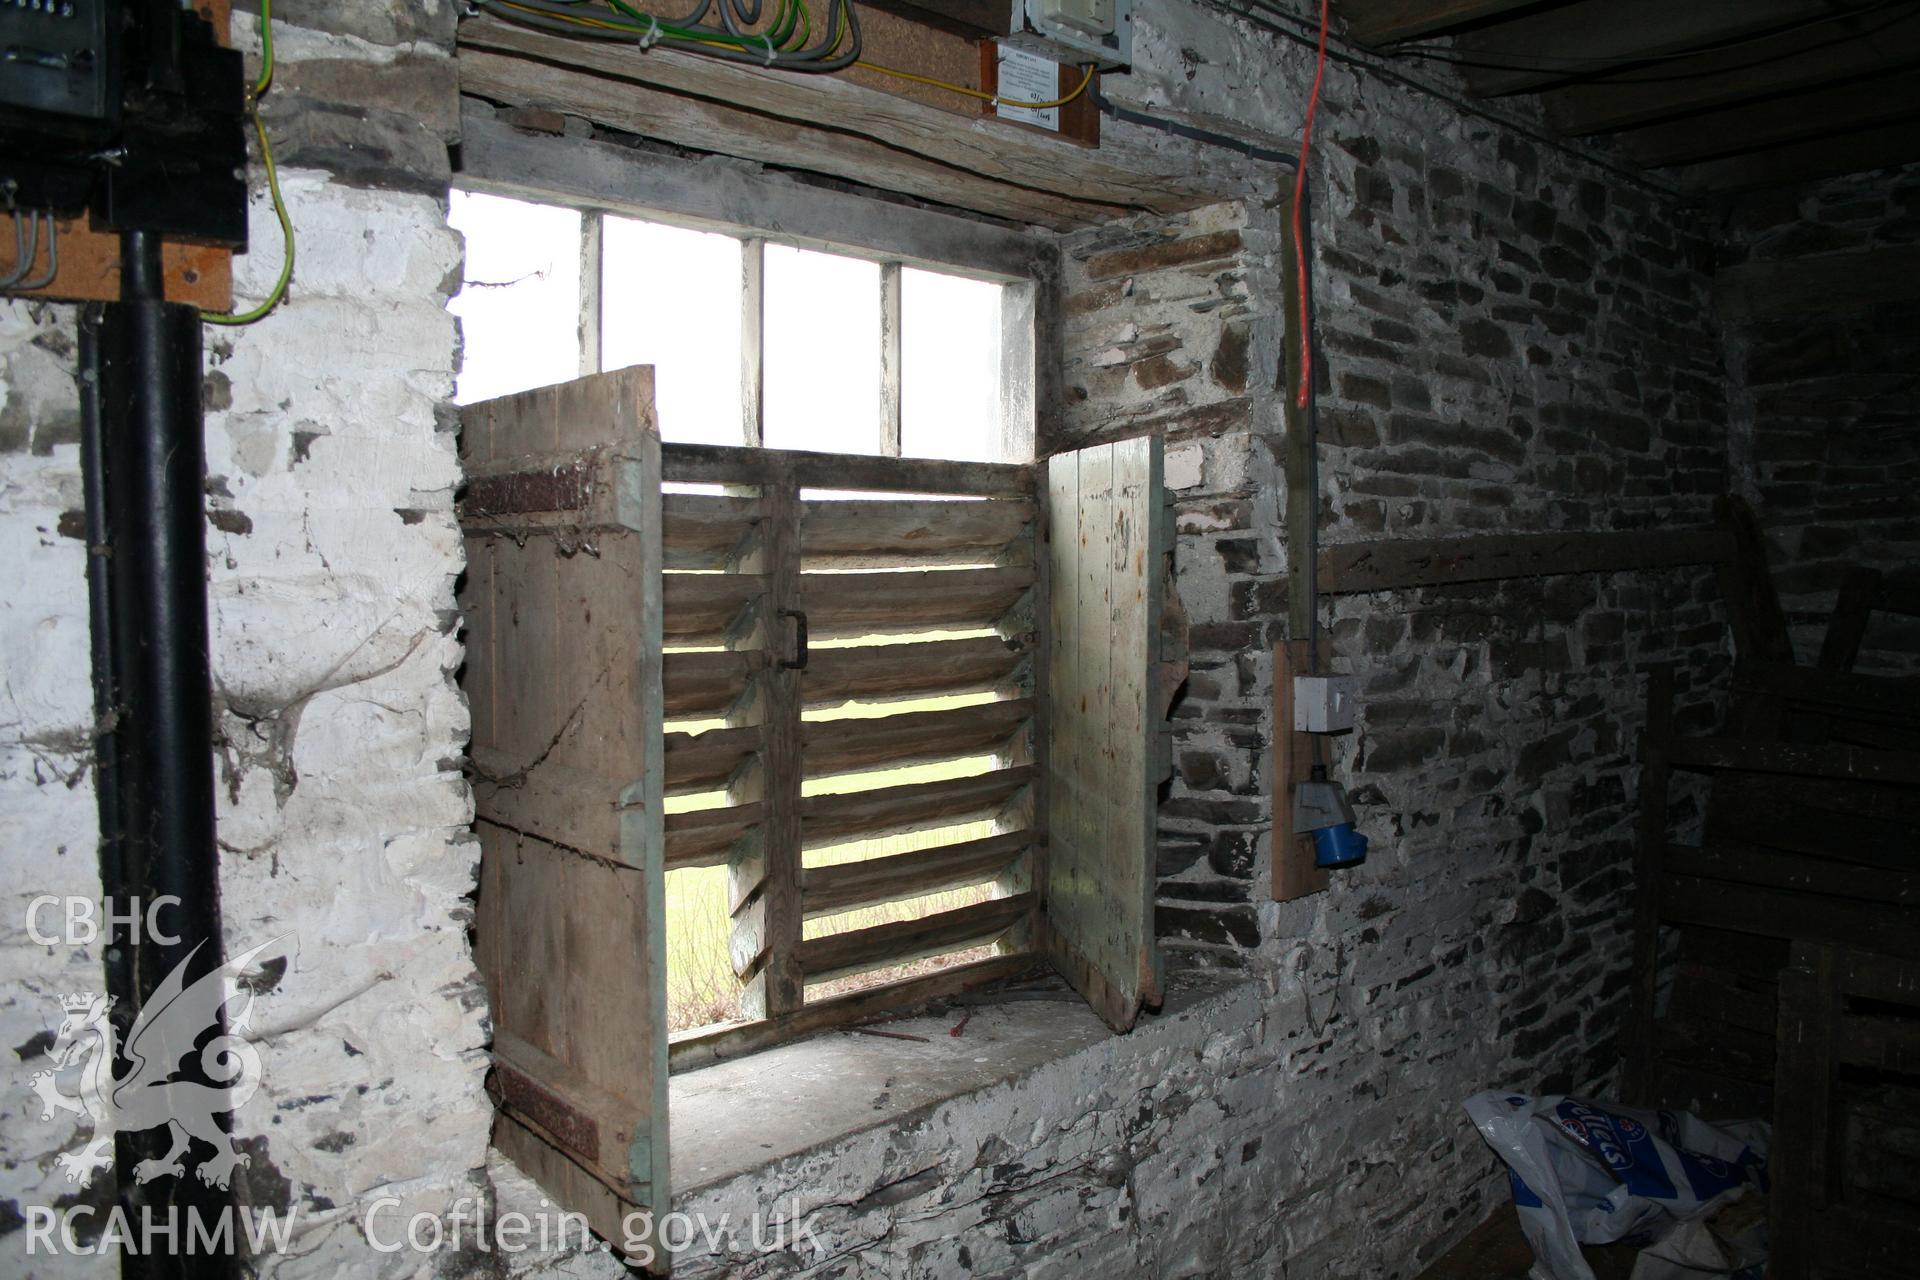 Interior view of wooden grille window shutters. Photographic survey of the threshing house, straw house, mixing house and root house at Tan-y-Graig Farm, Llanfarian, conducted by Geoff Ward and John Wiles, 11th December 2006.